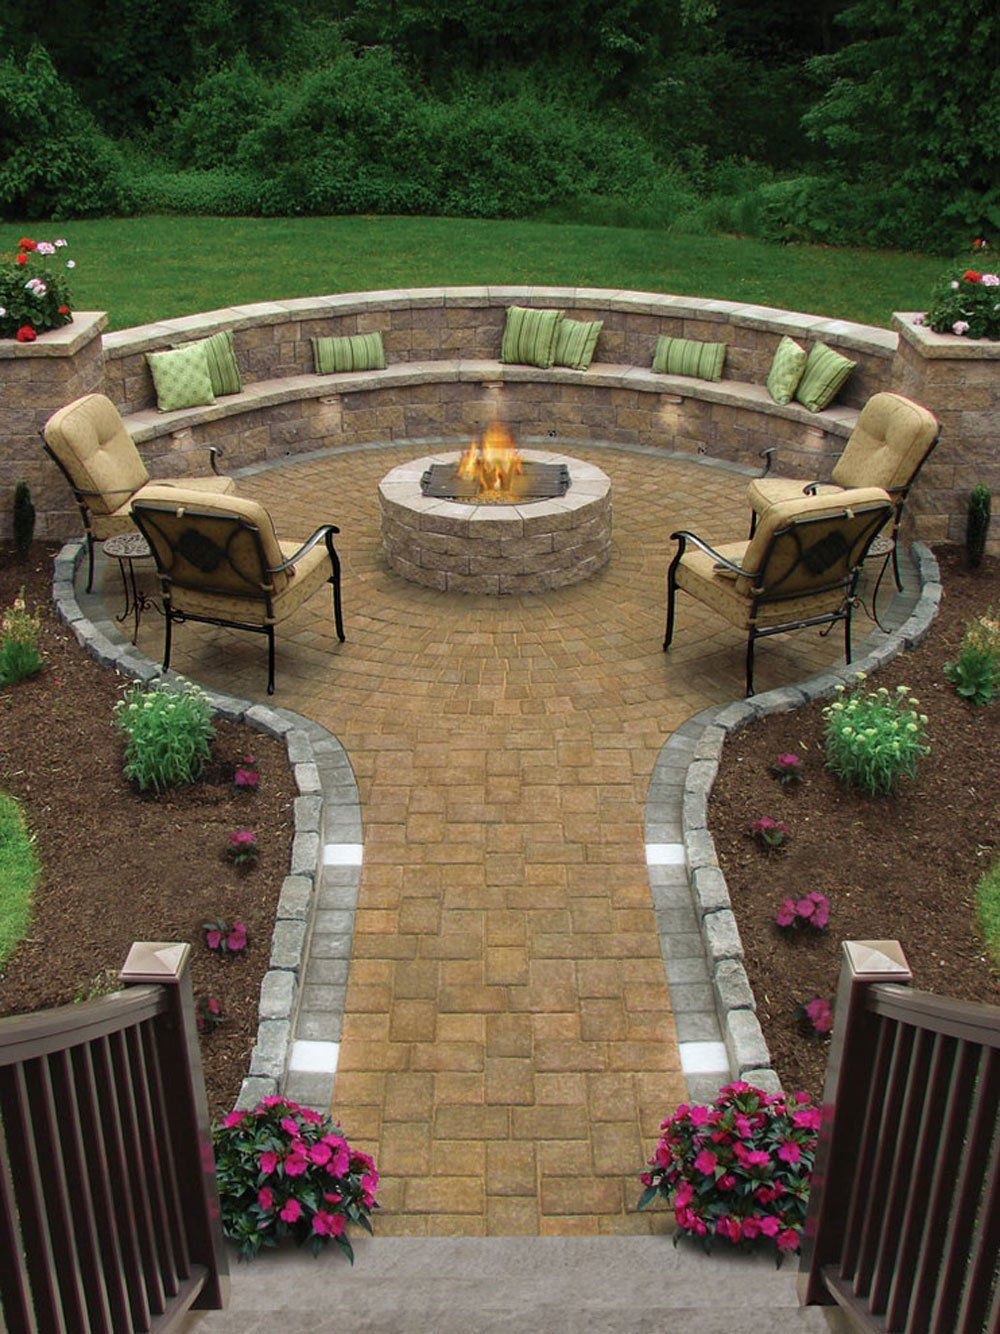 17 Of The Most Amazing Seating Area Around The Fire Pit Ever inside dimensions 1000 X 1334